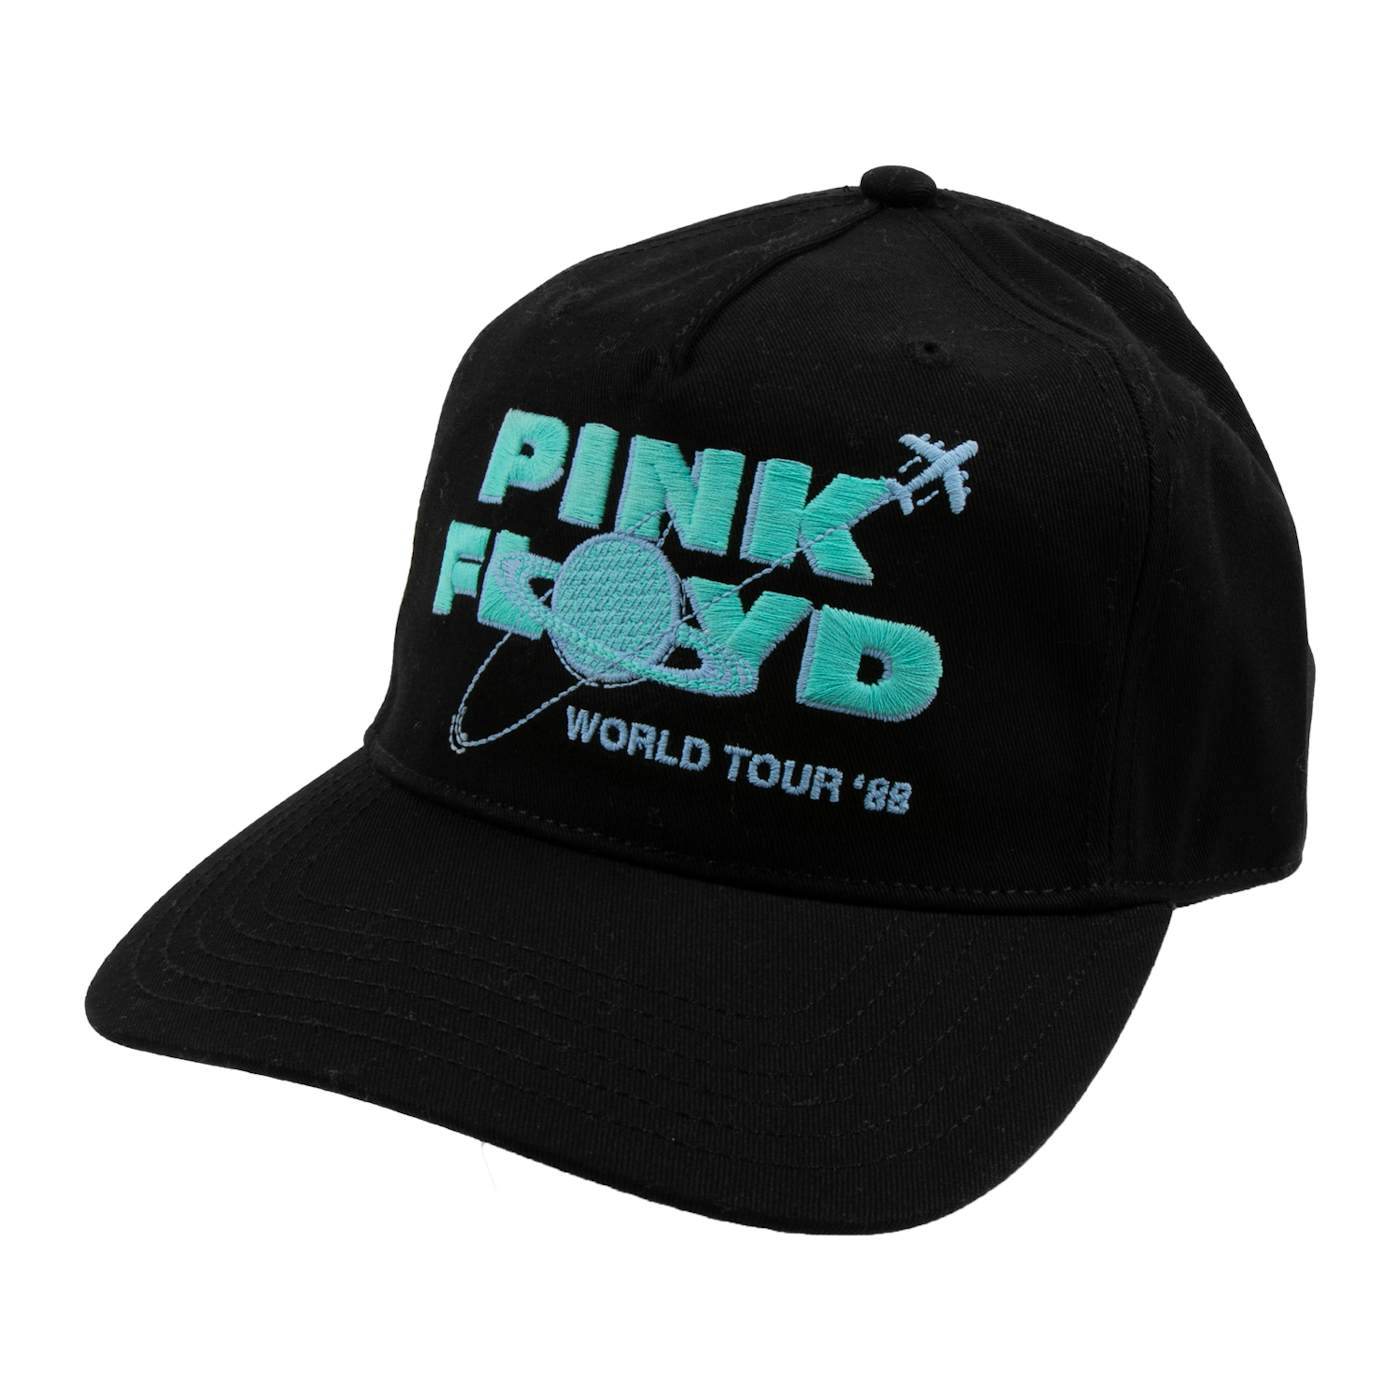 World Tour Embroidered Hat - Pink Floyd